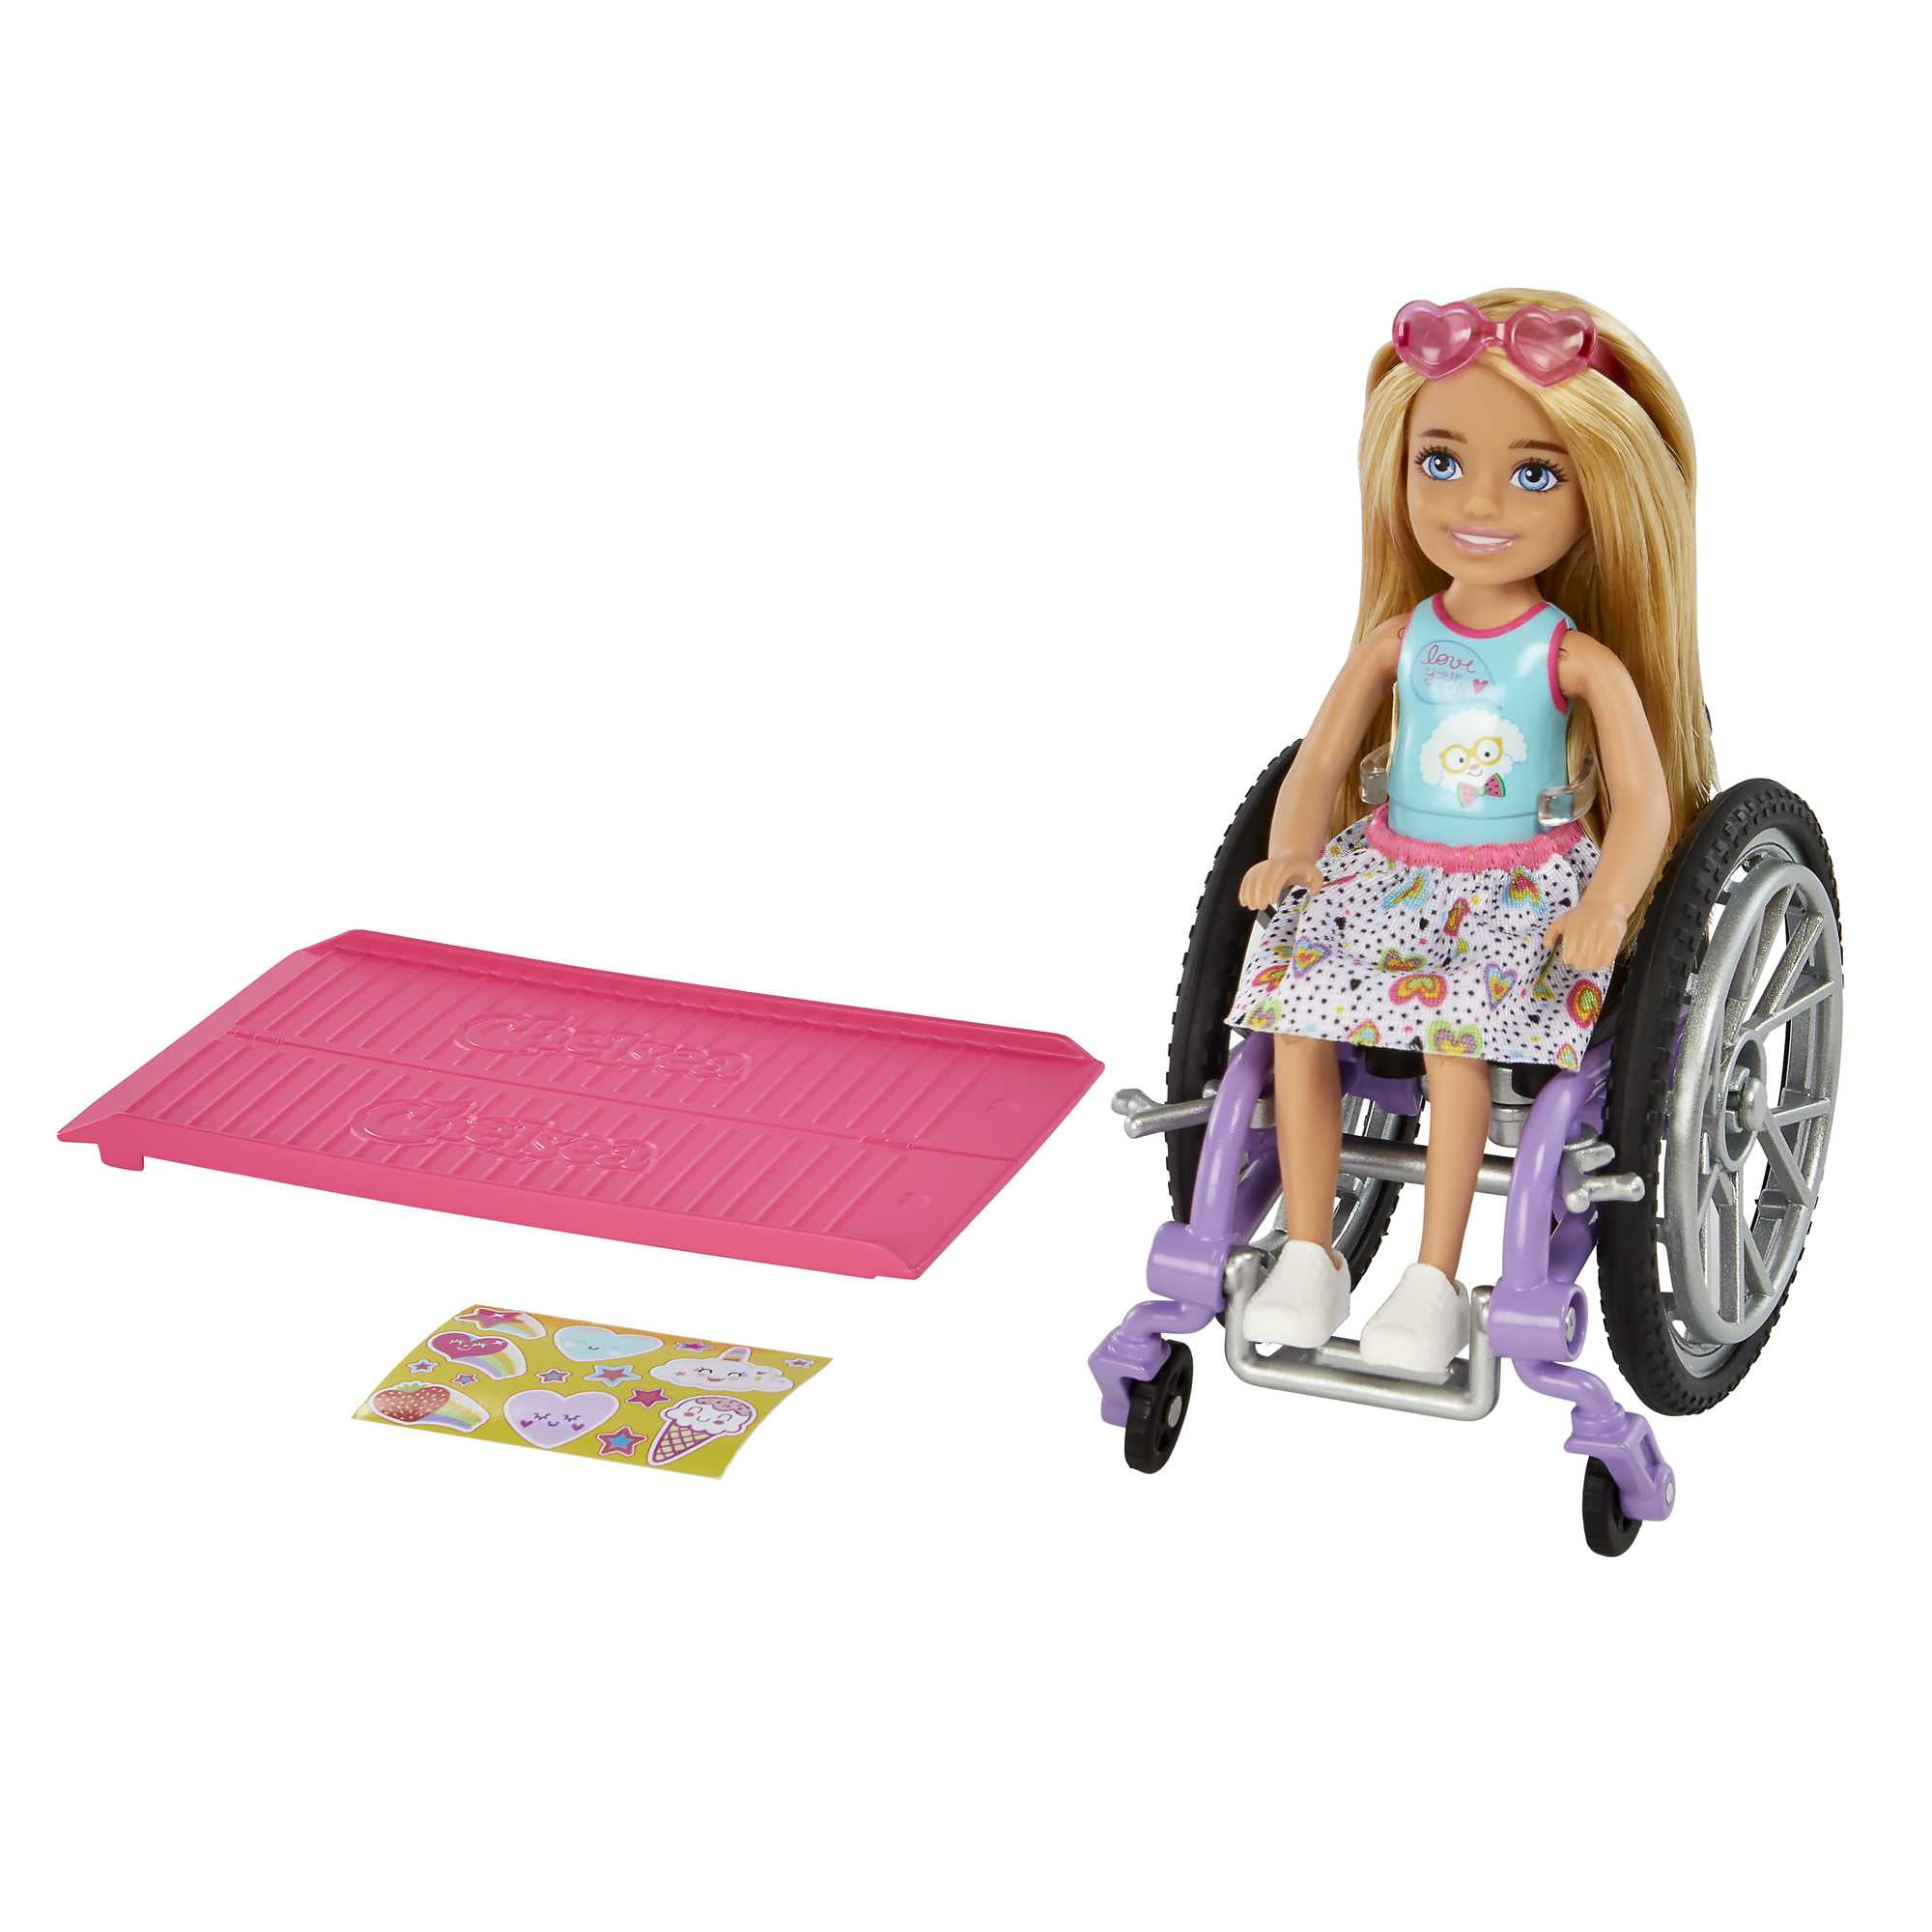 Barbie Chelsea Doll (Blonde) & Wheelchair, Toy for 3 Year Olds & Up 